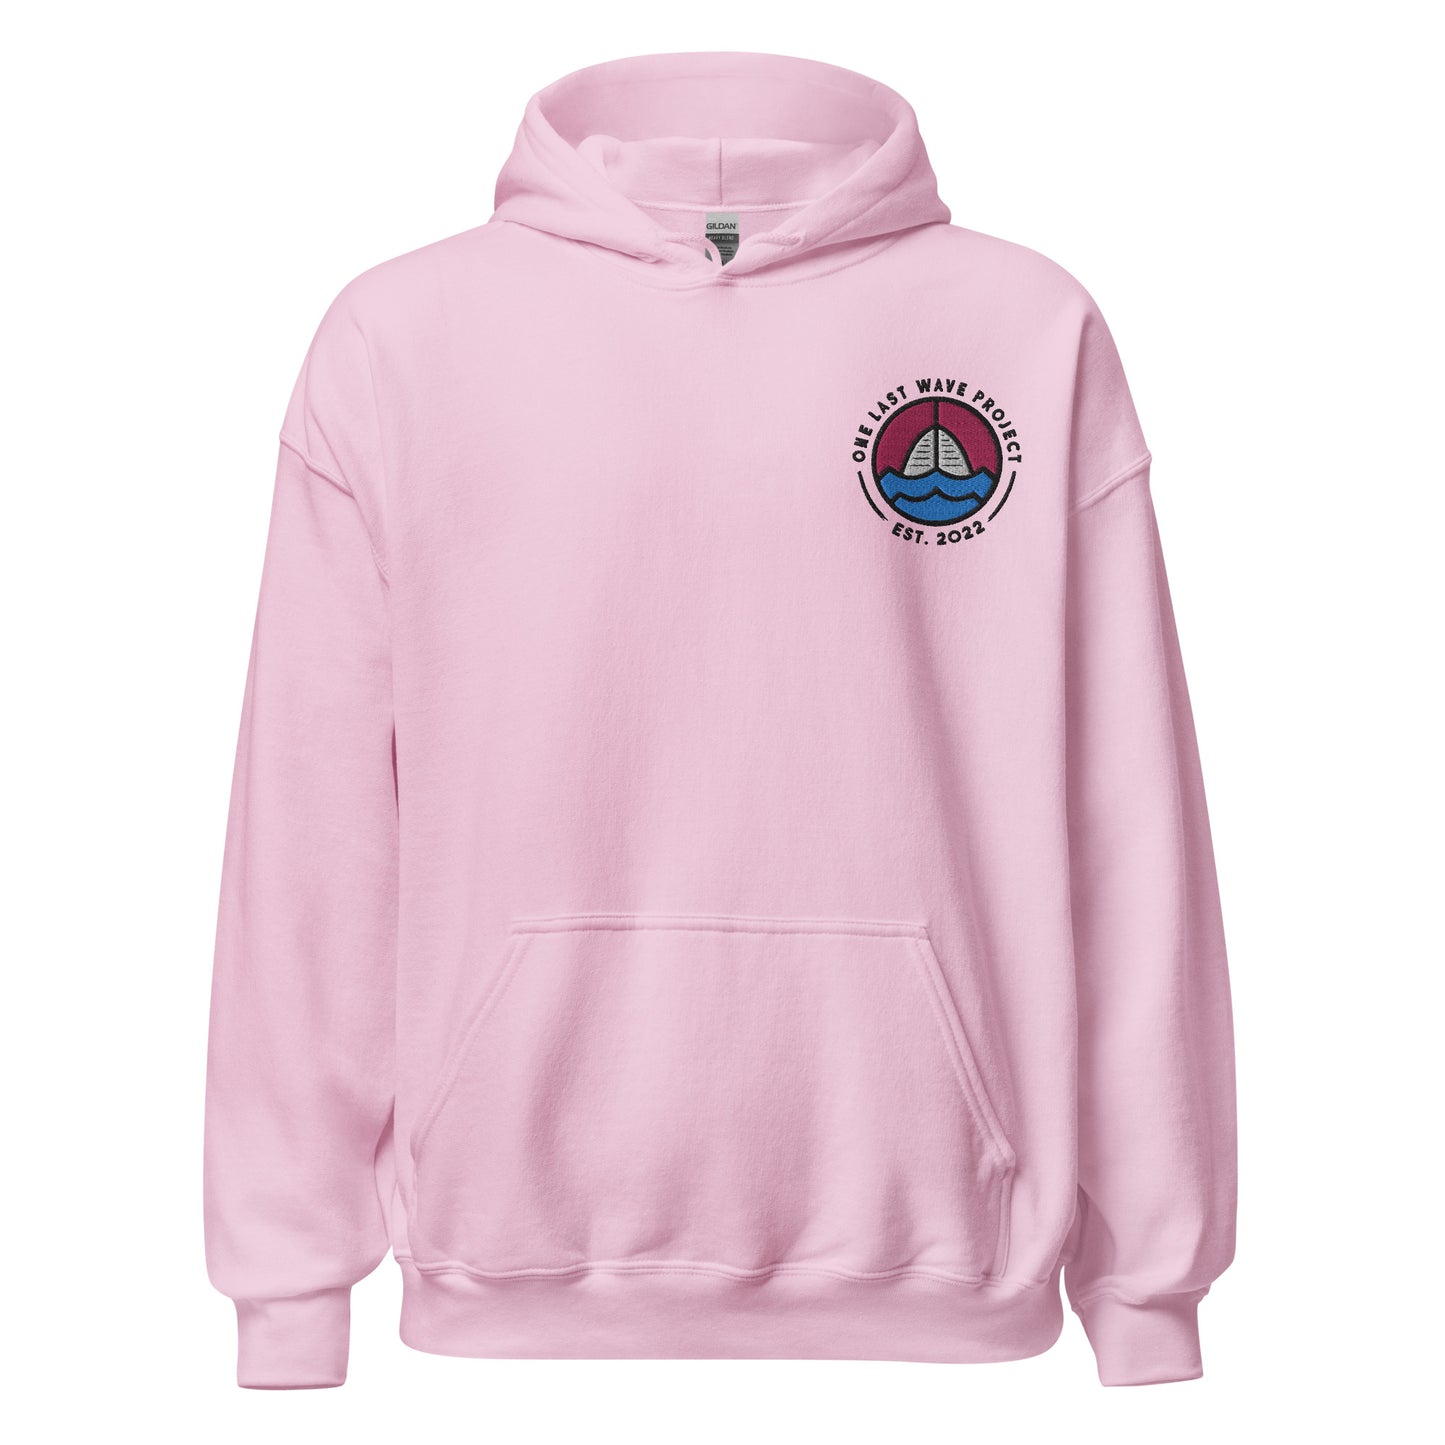 OLWP - Embroidered Hoodie